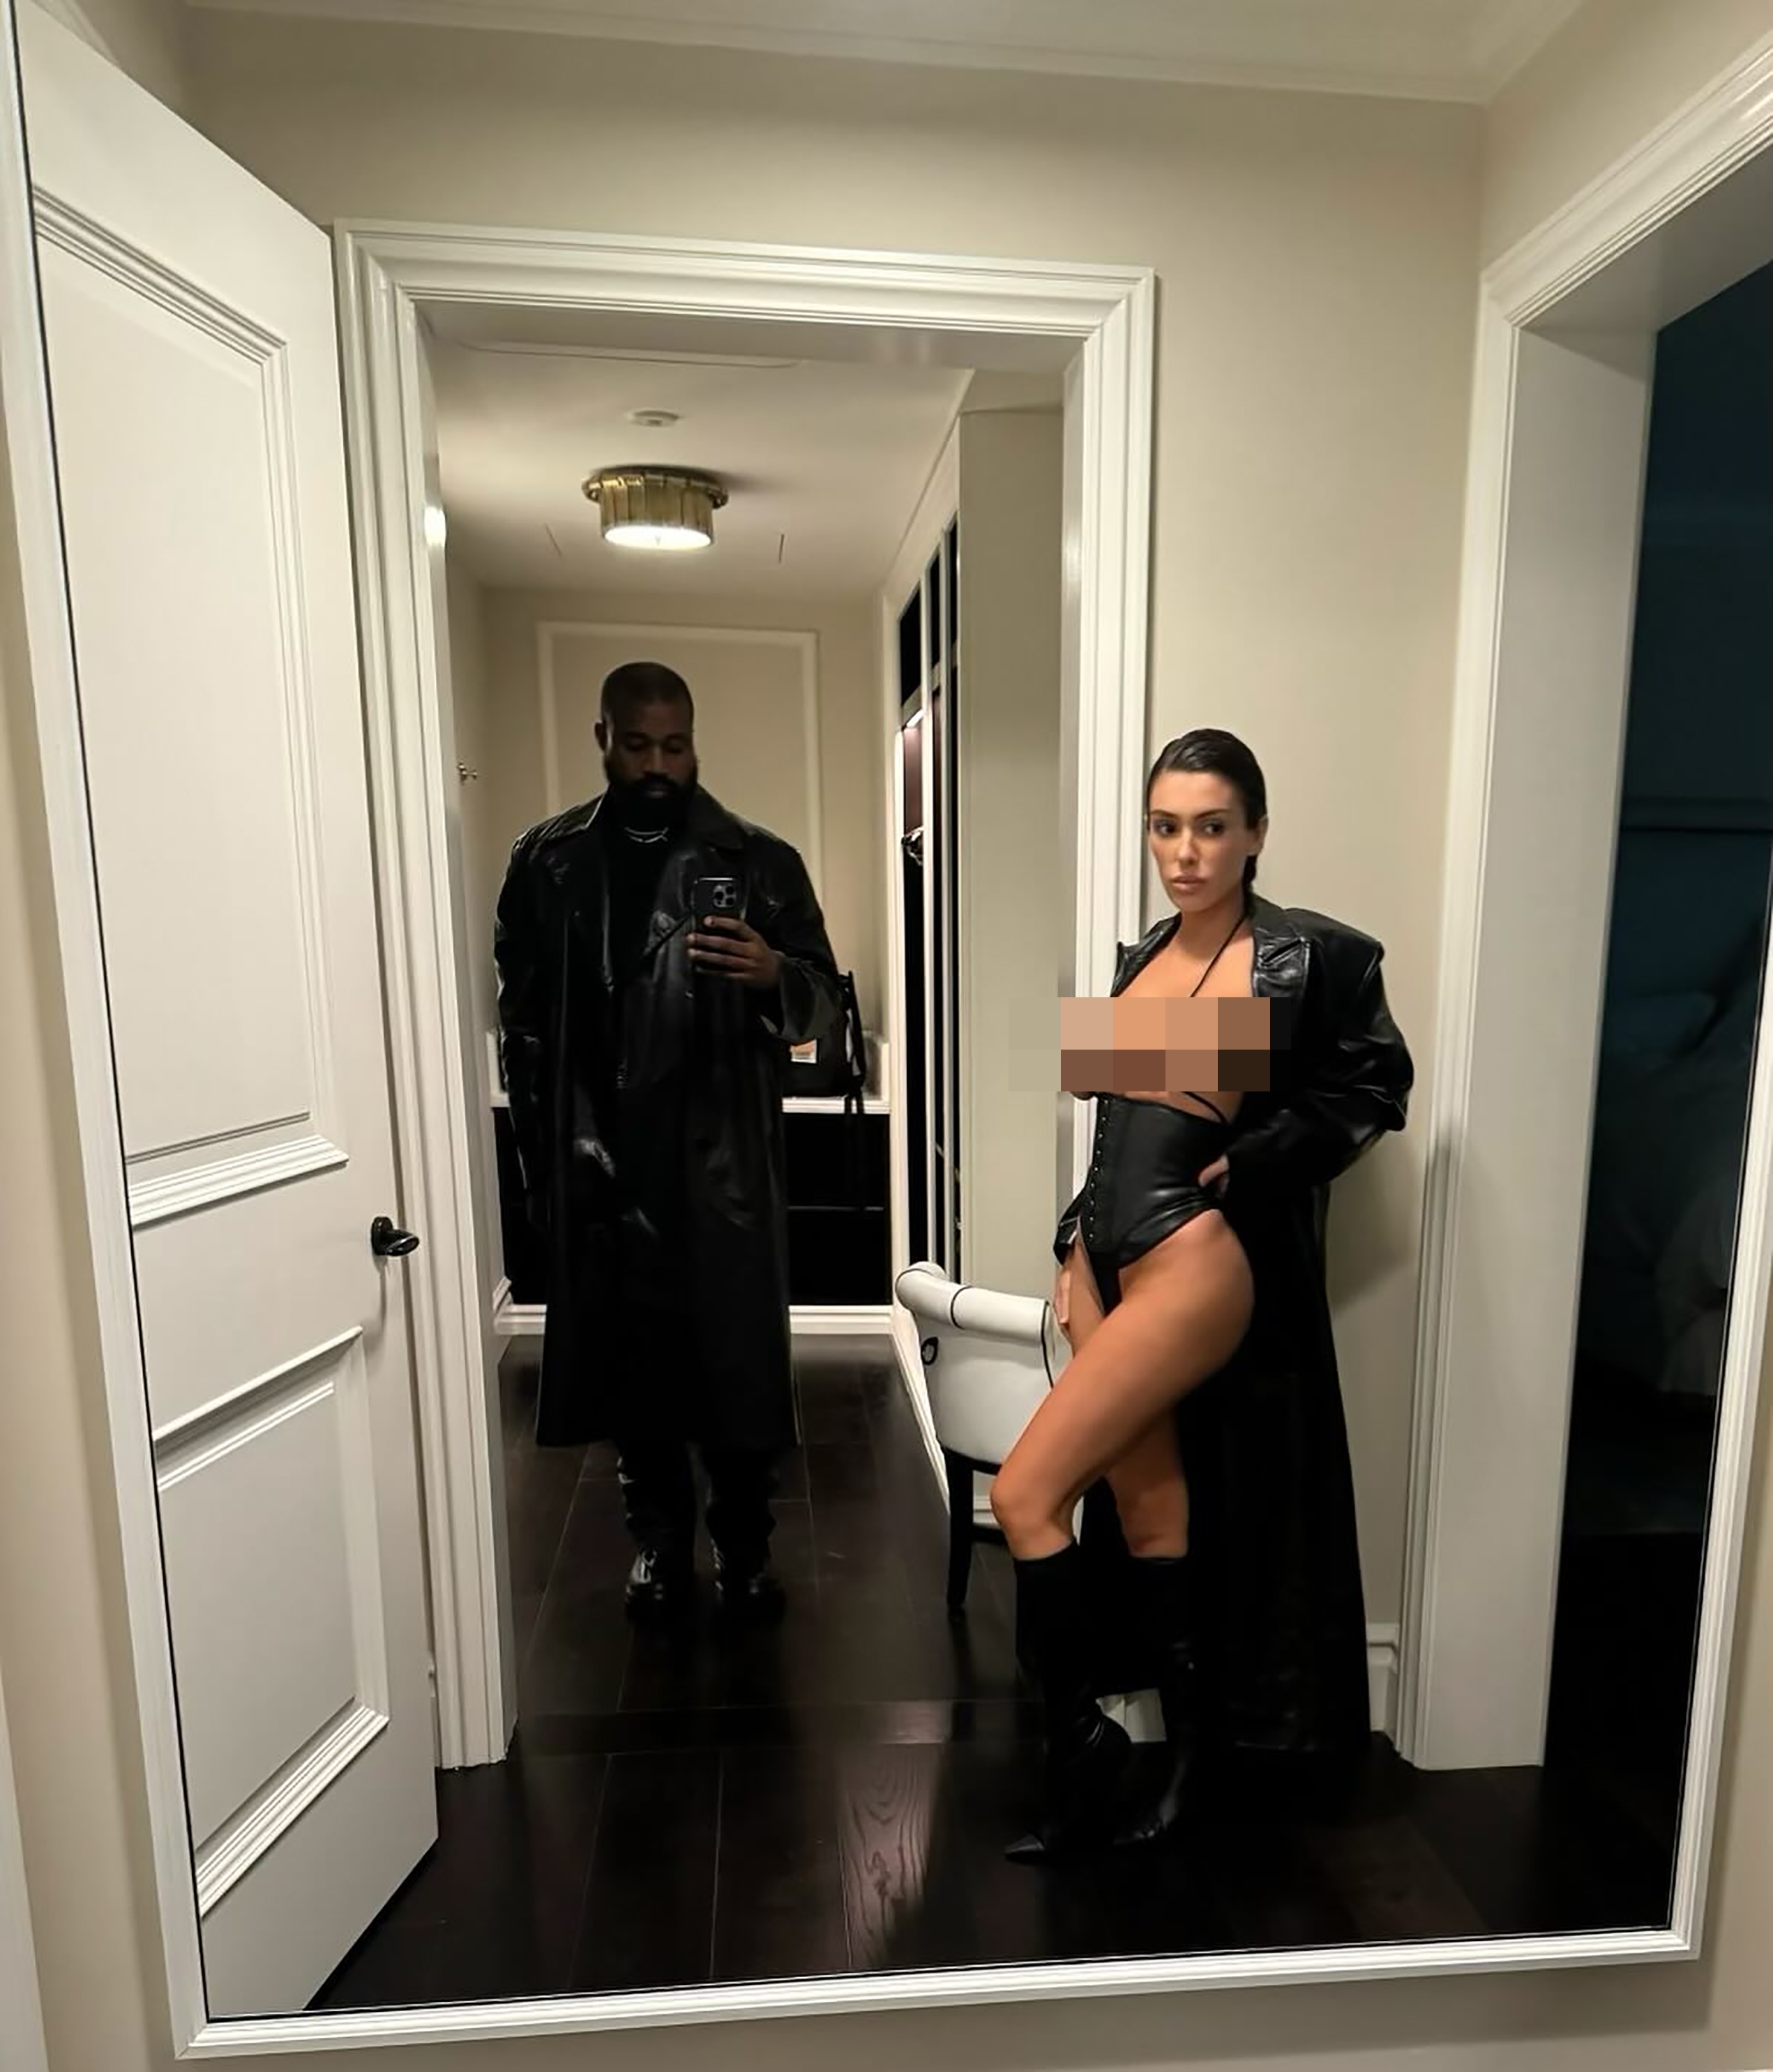 Kanye West's wife Bianca Censori has been seen in an NSFW outfit